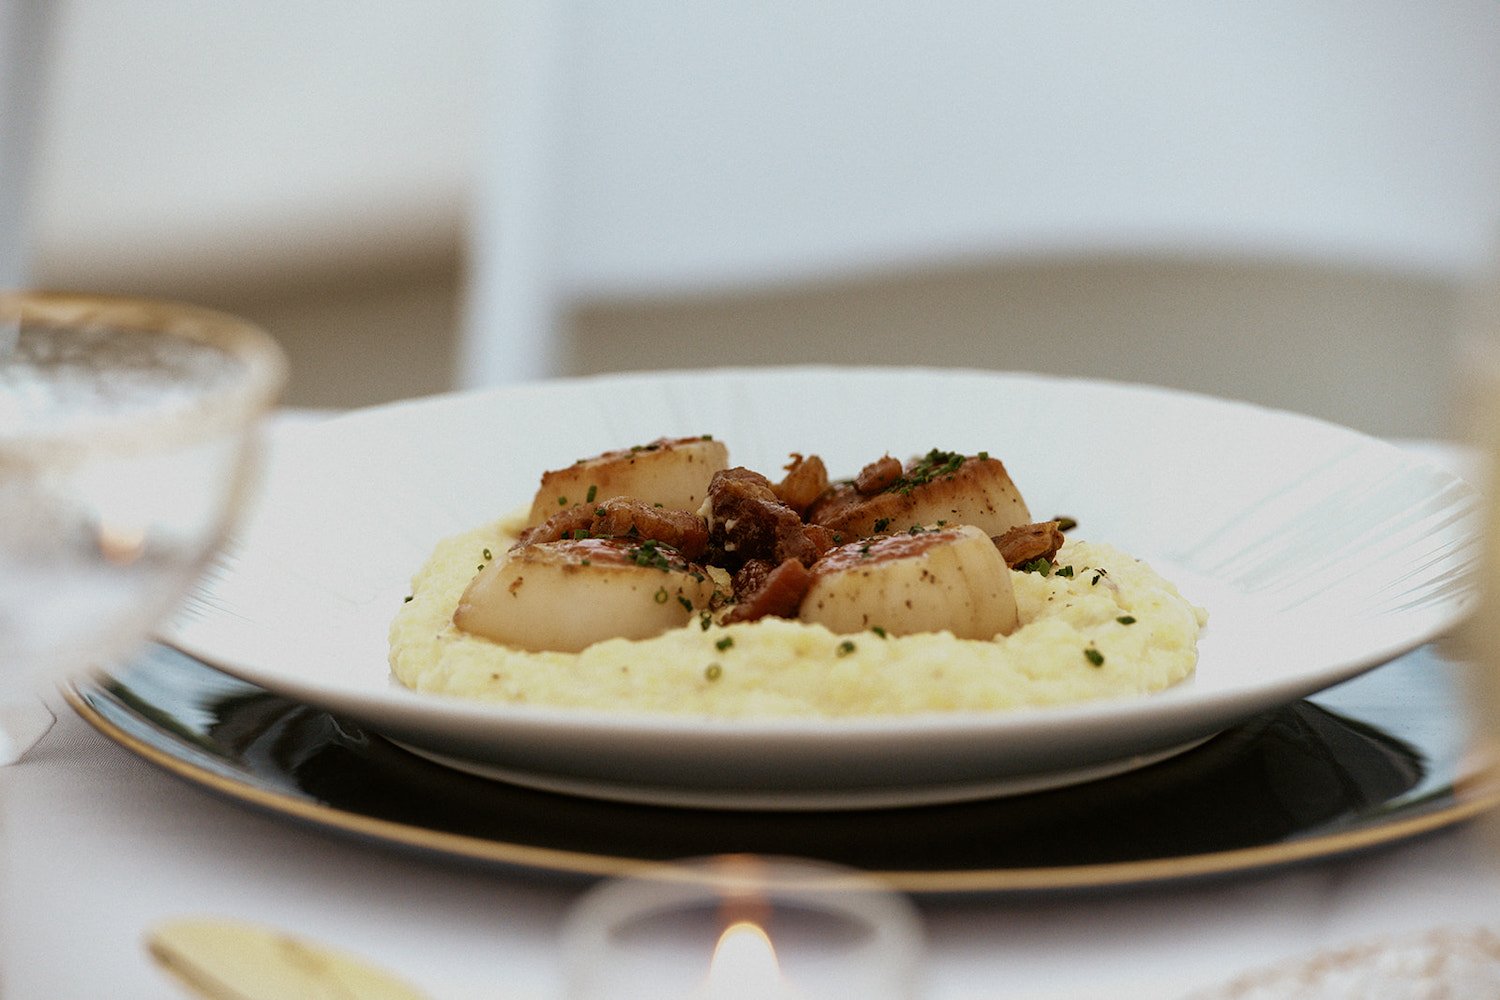 Scallops over a bed of mashed potatoes.